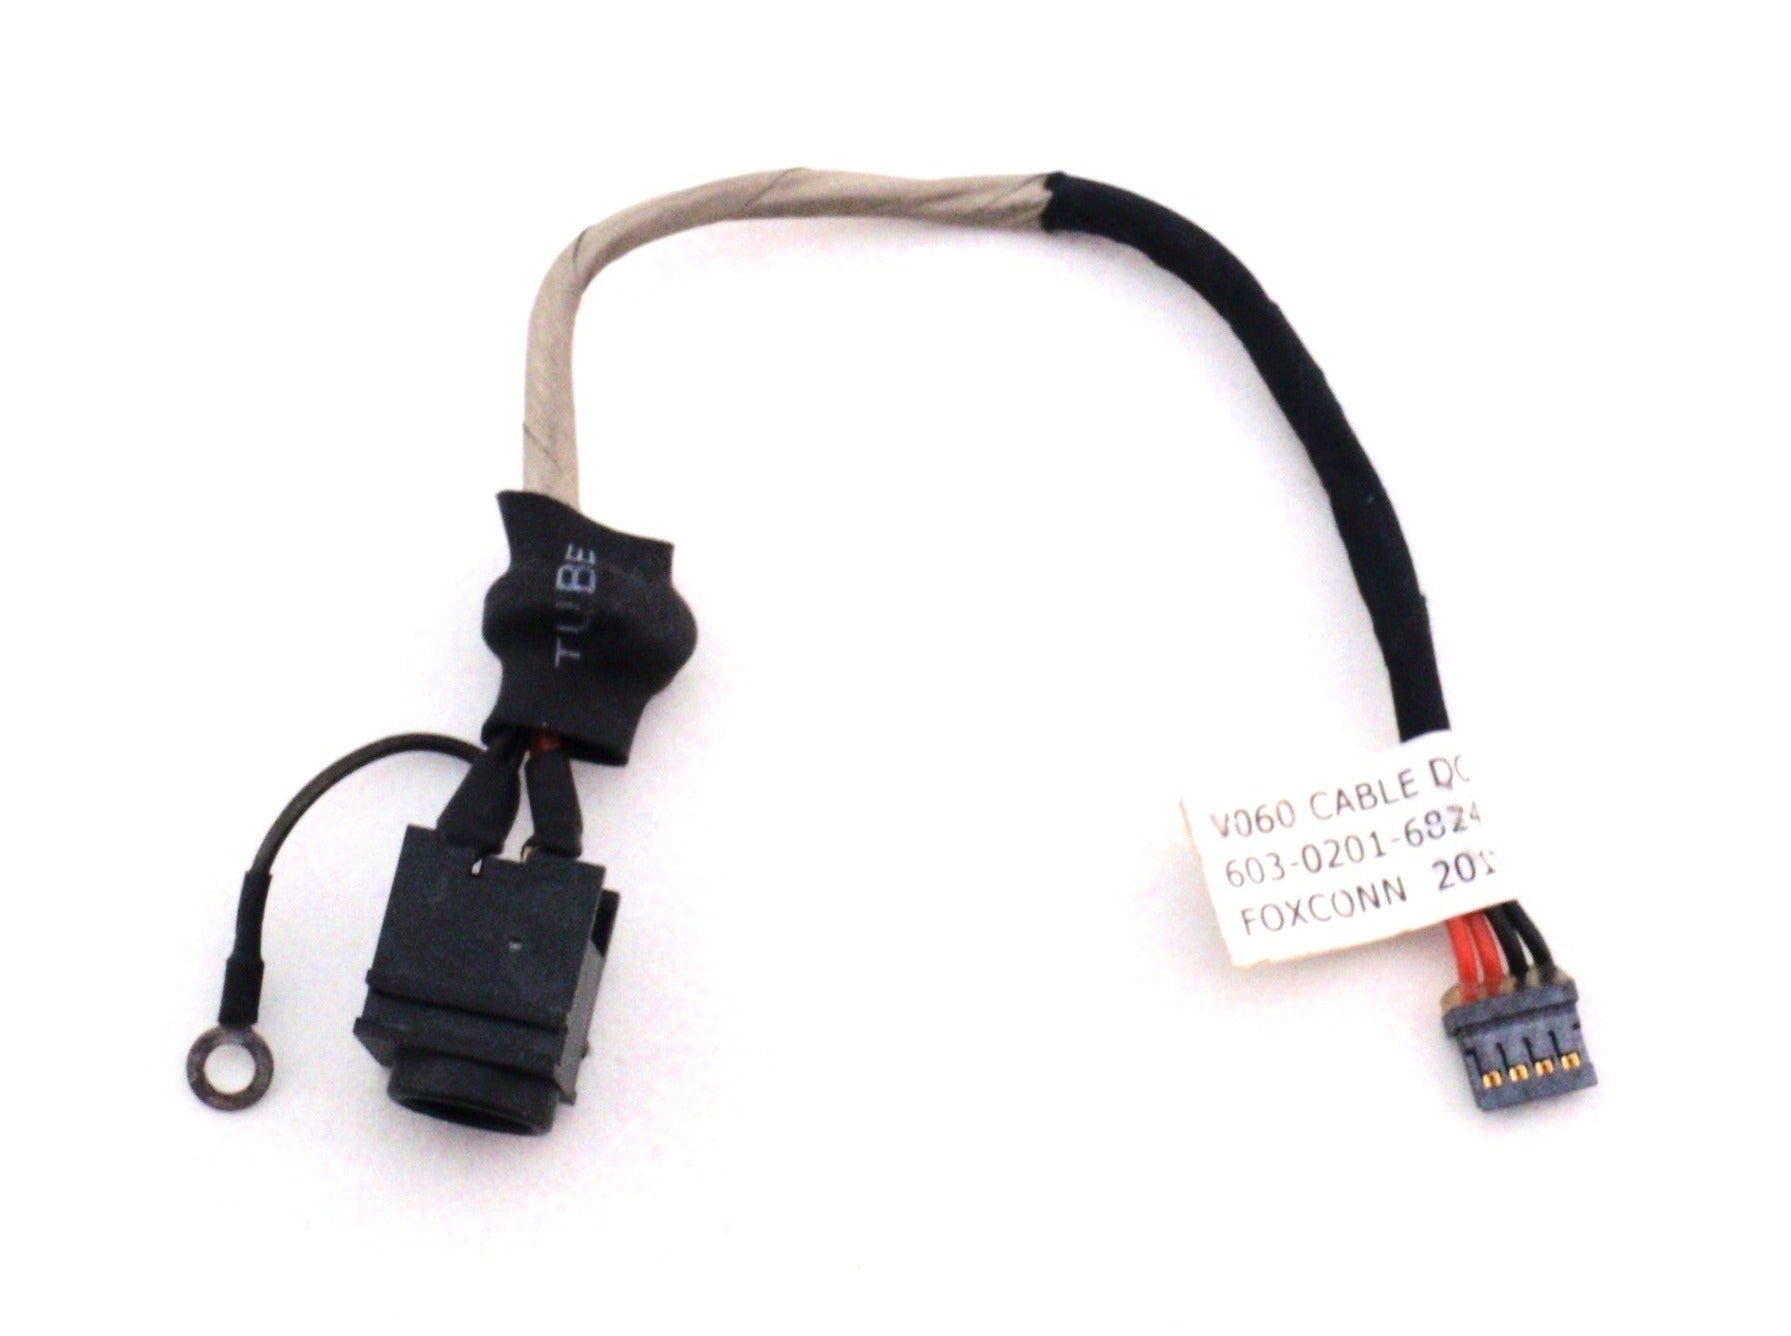 Sony New DC In Power Jack Charging Port Connector Cable Vaio VPC-CB V060 603-0201-6824_A 603-0101-6824_A 603-0001-6824_A